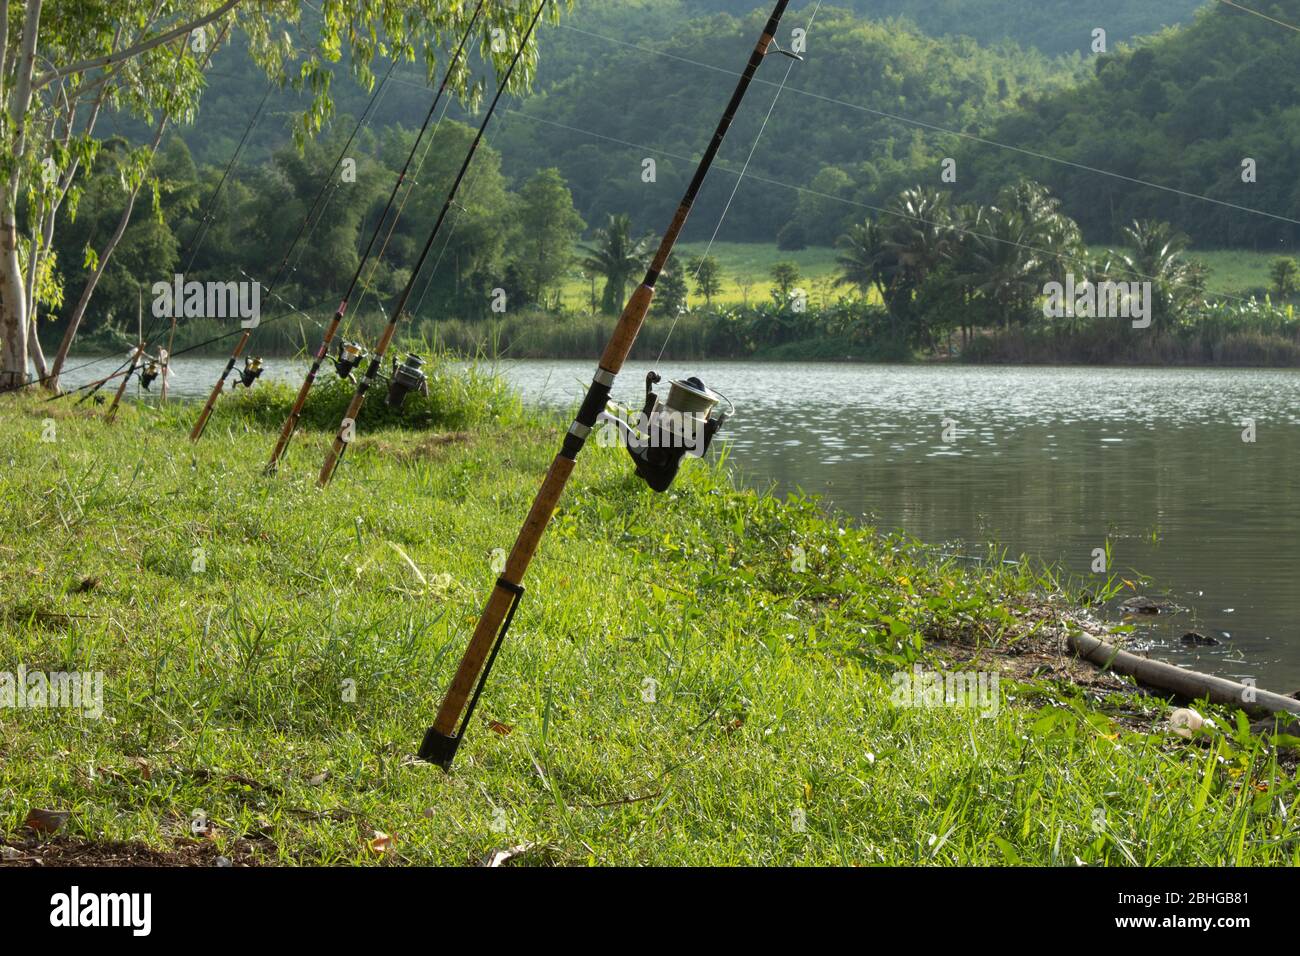 Fishing rod that is implanted on the ground at the Reservoir. Stock Photo